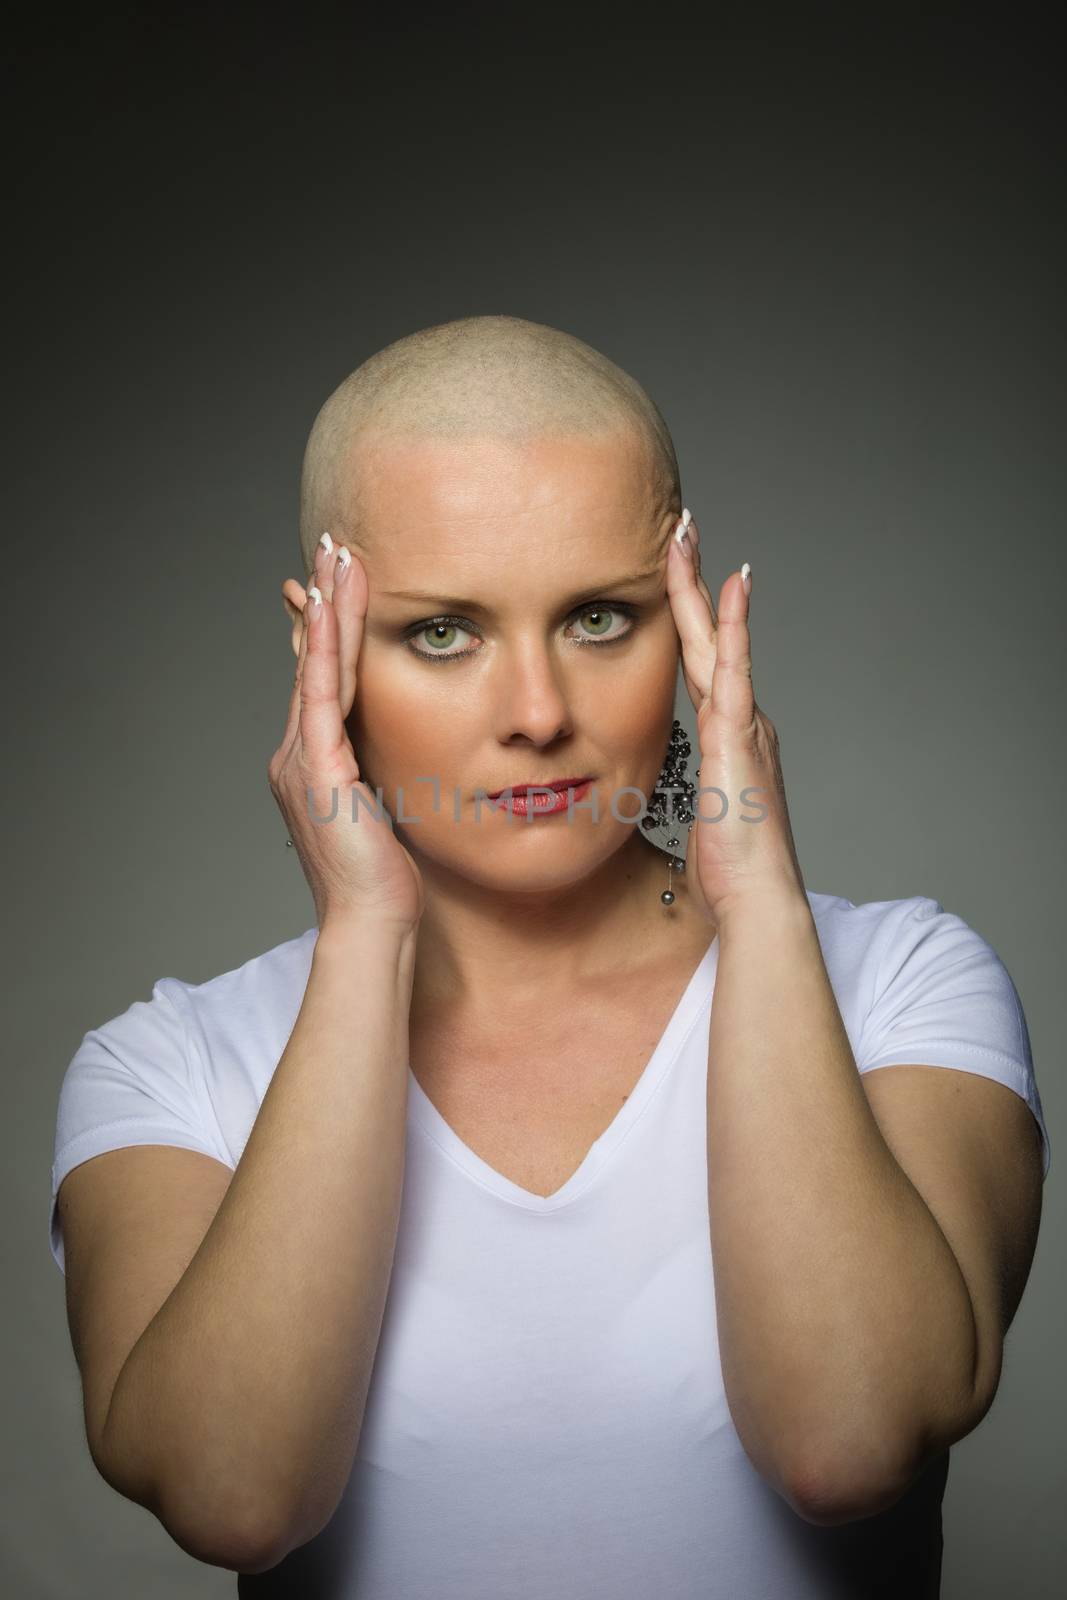 Portrait of beautiful middle age woman patient with cancer with shaved head without hair, hope in healing. Hand on head. She lost her hair